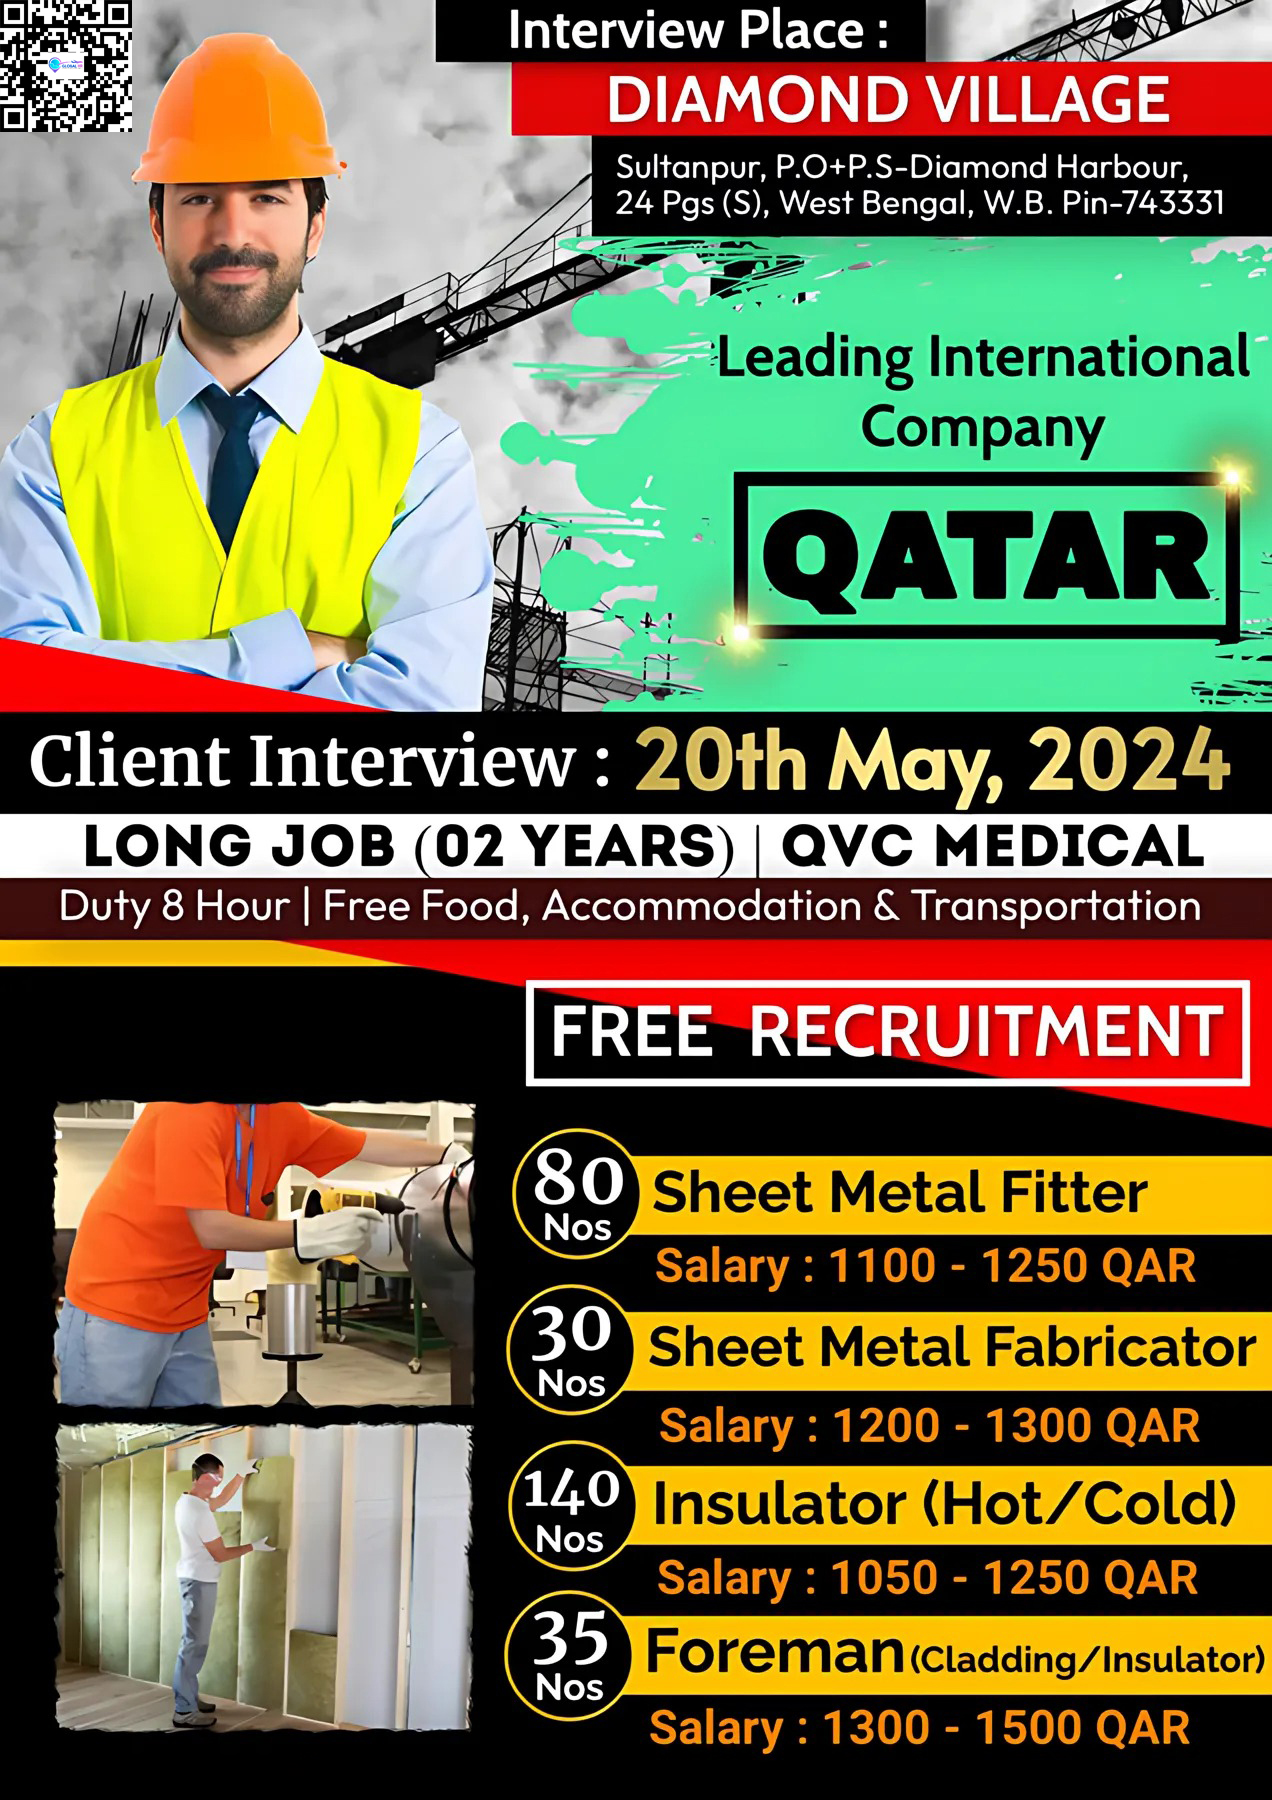 DIRECT CLIENT INTERVIEW ON 20 MAY, 2024 – KOLKATA | FREE RECRUITMENT for QATAR (LONG JOB)